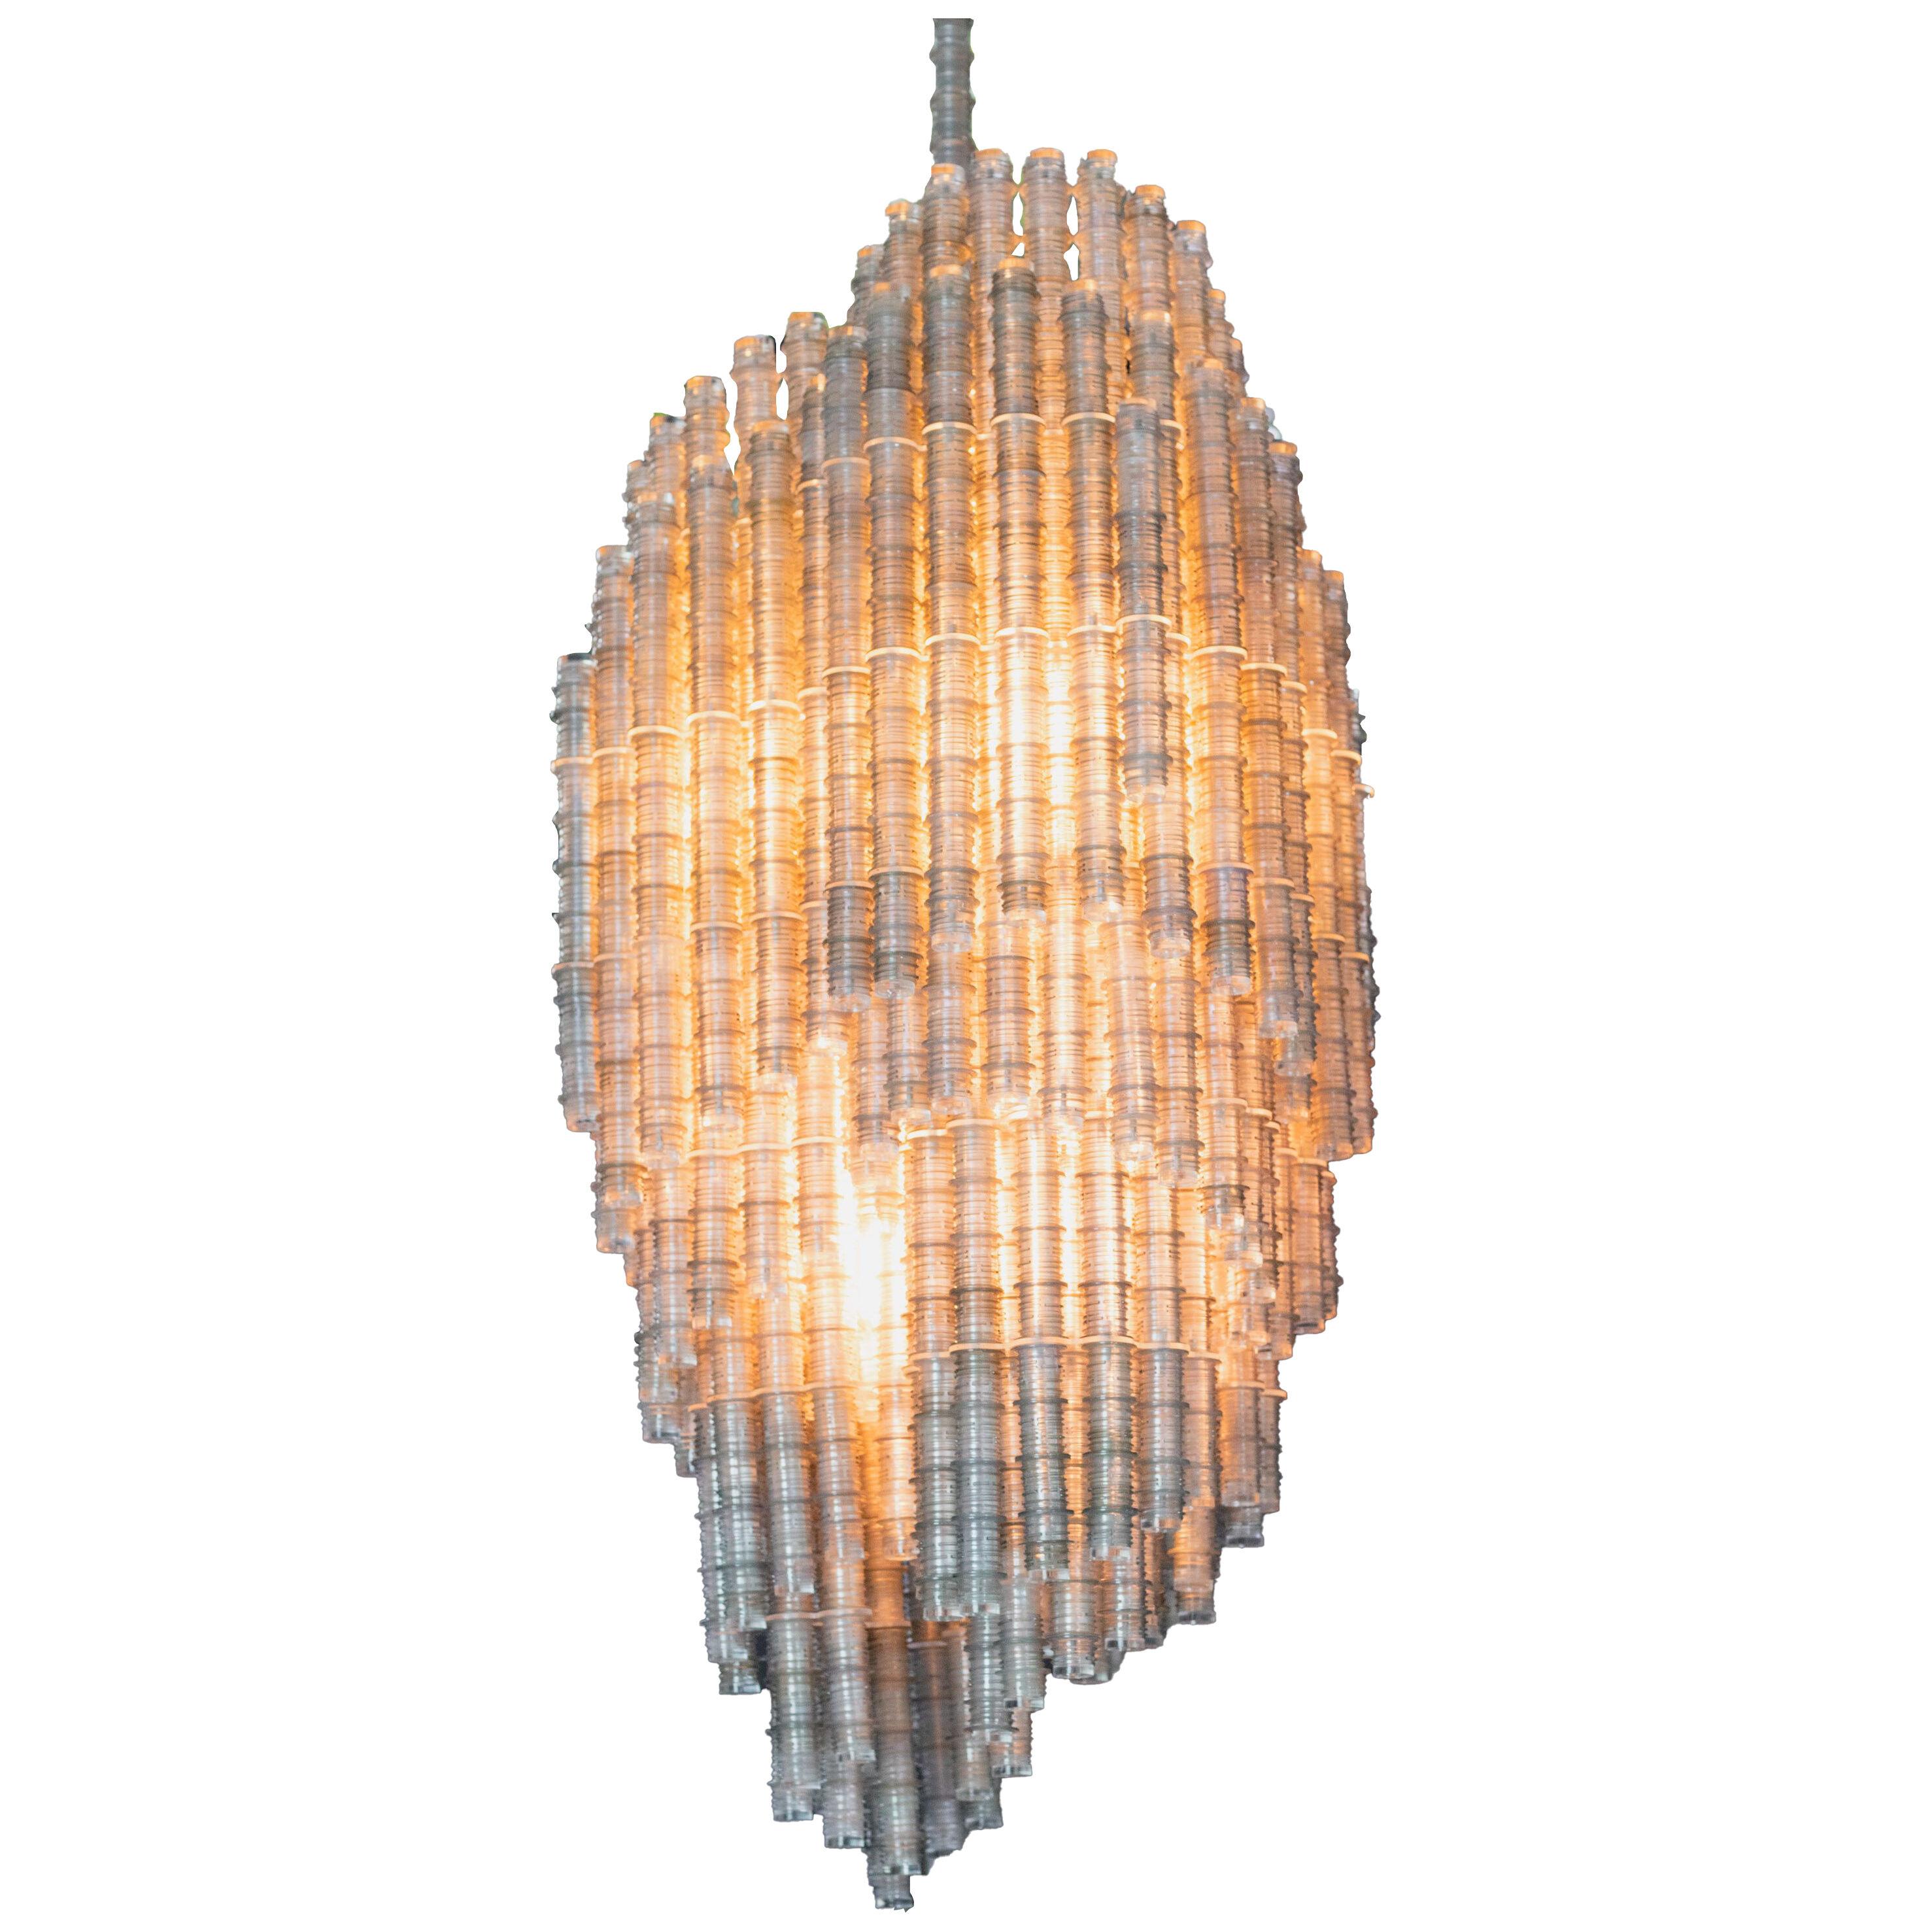 'SYMBIOSIS' chandelier by Thierry Jeannot